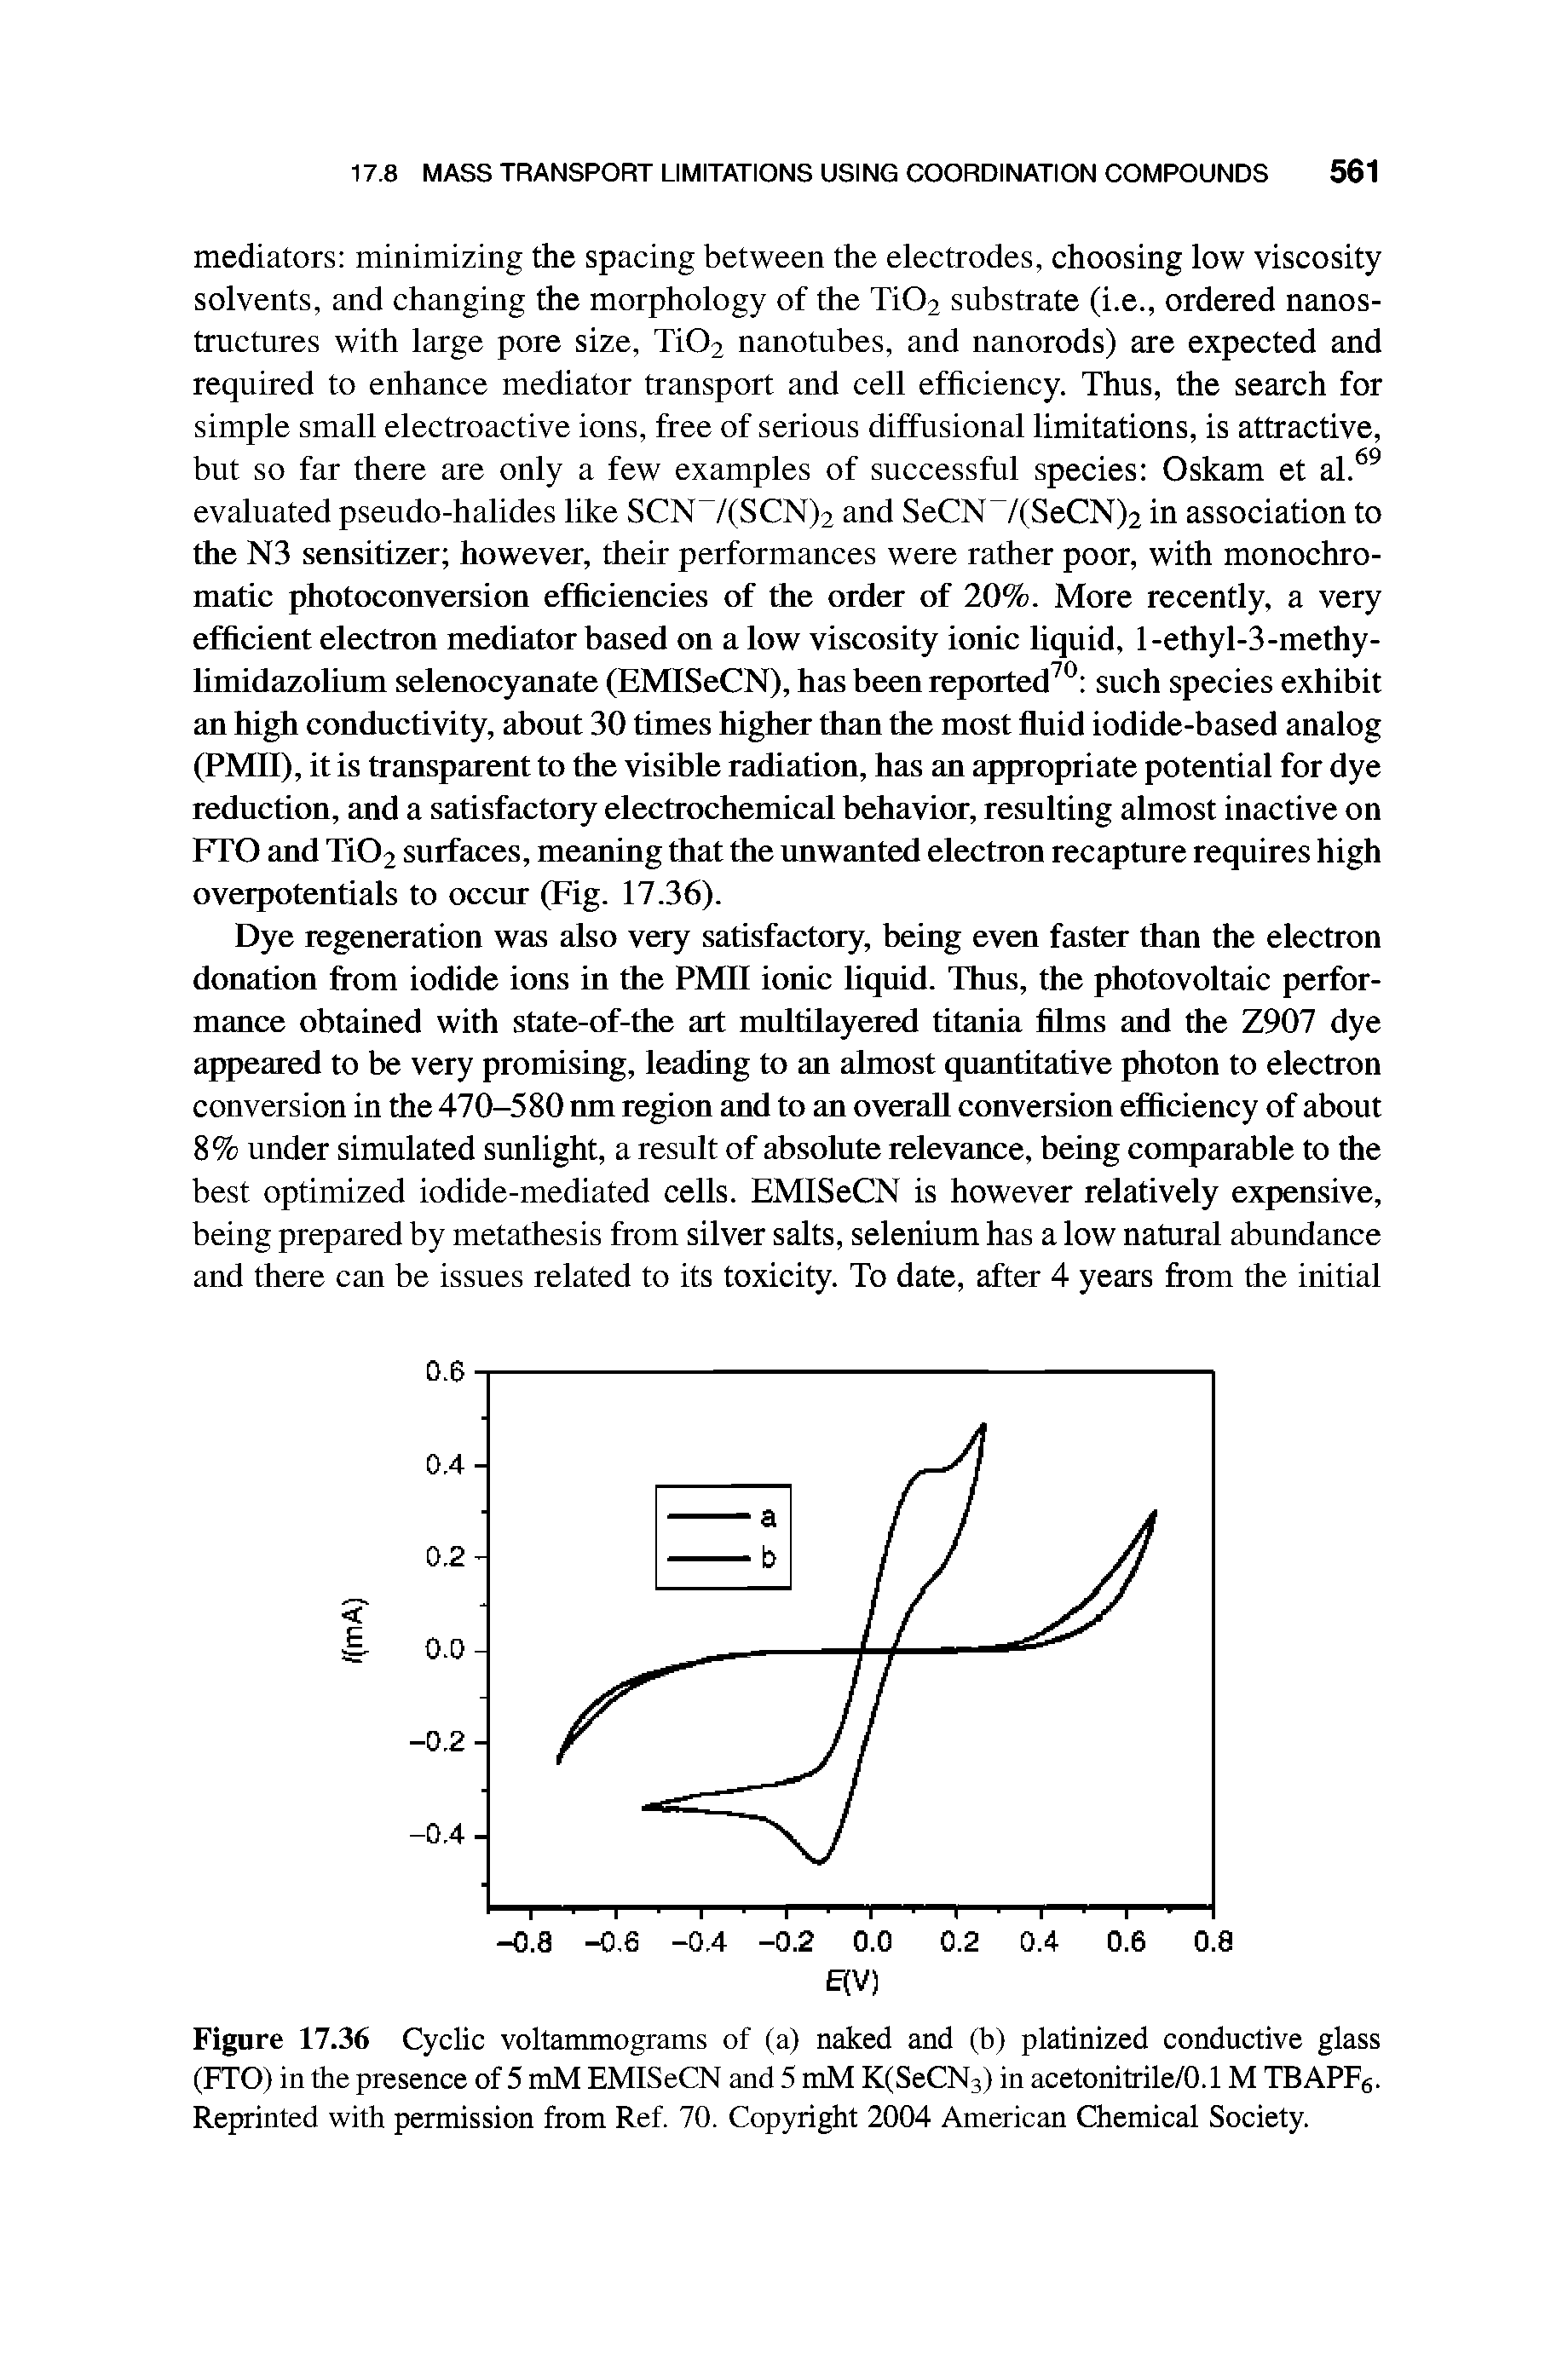 Figure 17.36 Cyclic voltammograms of (a) naked and (b) platinized conductive glass (FTO) in the presence of 5 mM EMISeCN and 5 mM K(SeCN3) in acetonitrile/0.1 M TBAPF6. Reprinted with permission from Ref. 70. Copyright 2004 American Chemical Society.